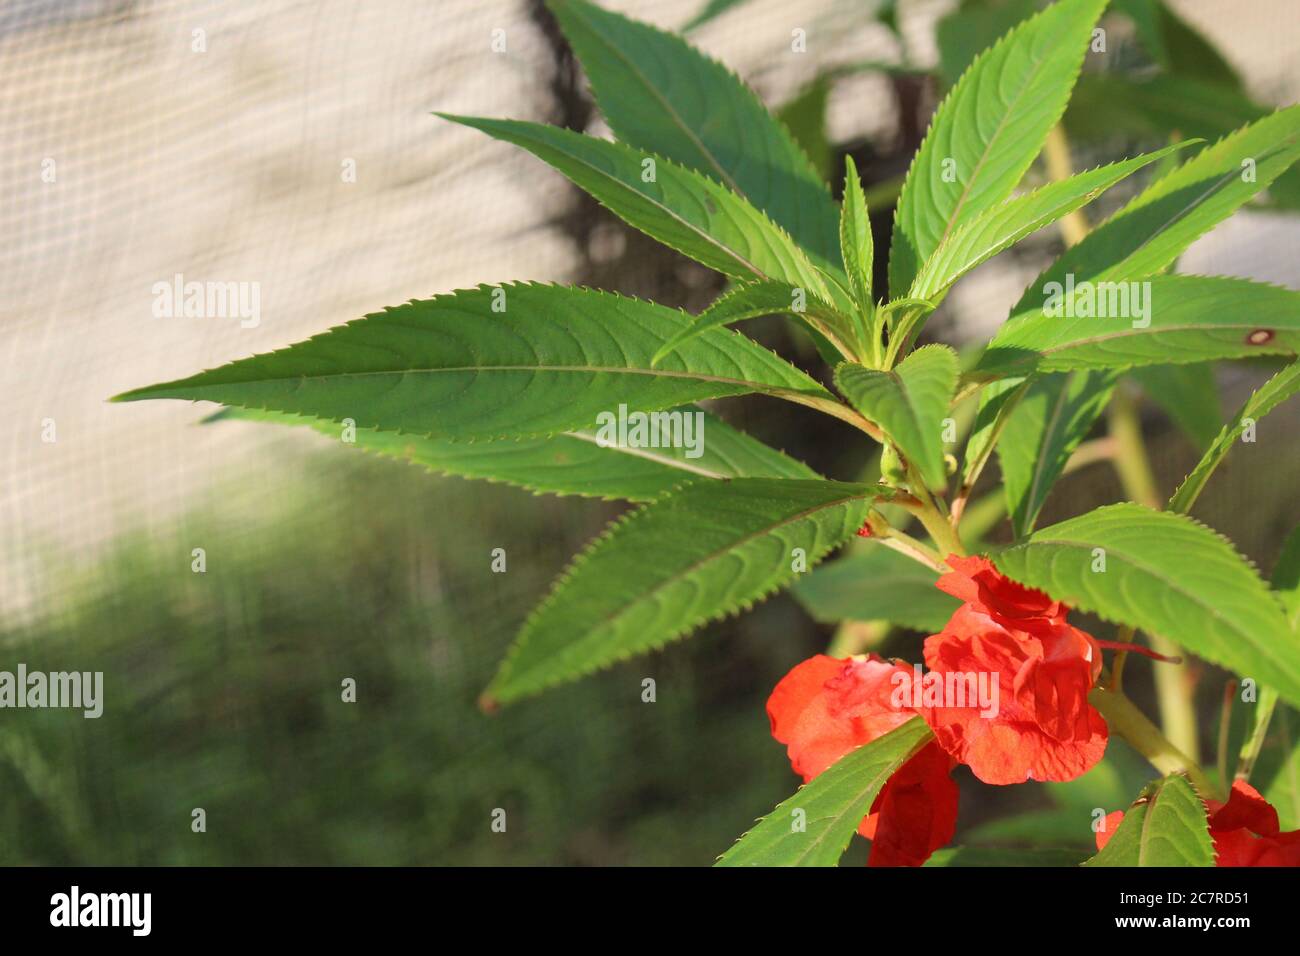 Shallow focus closeup shot of a red Balsam flower with big green leaves Stock Photo